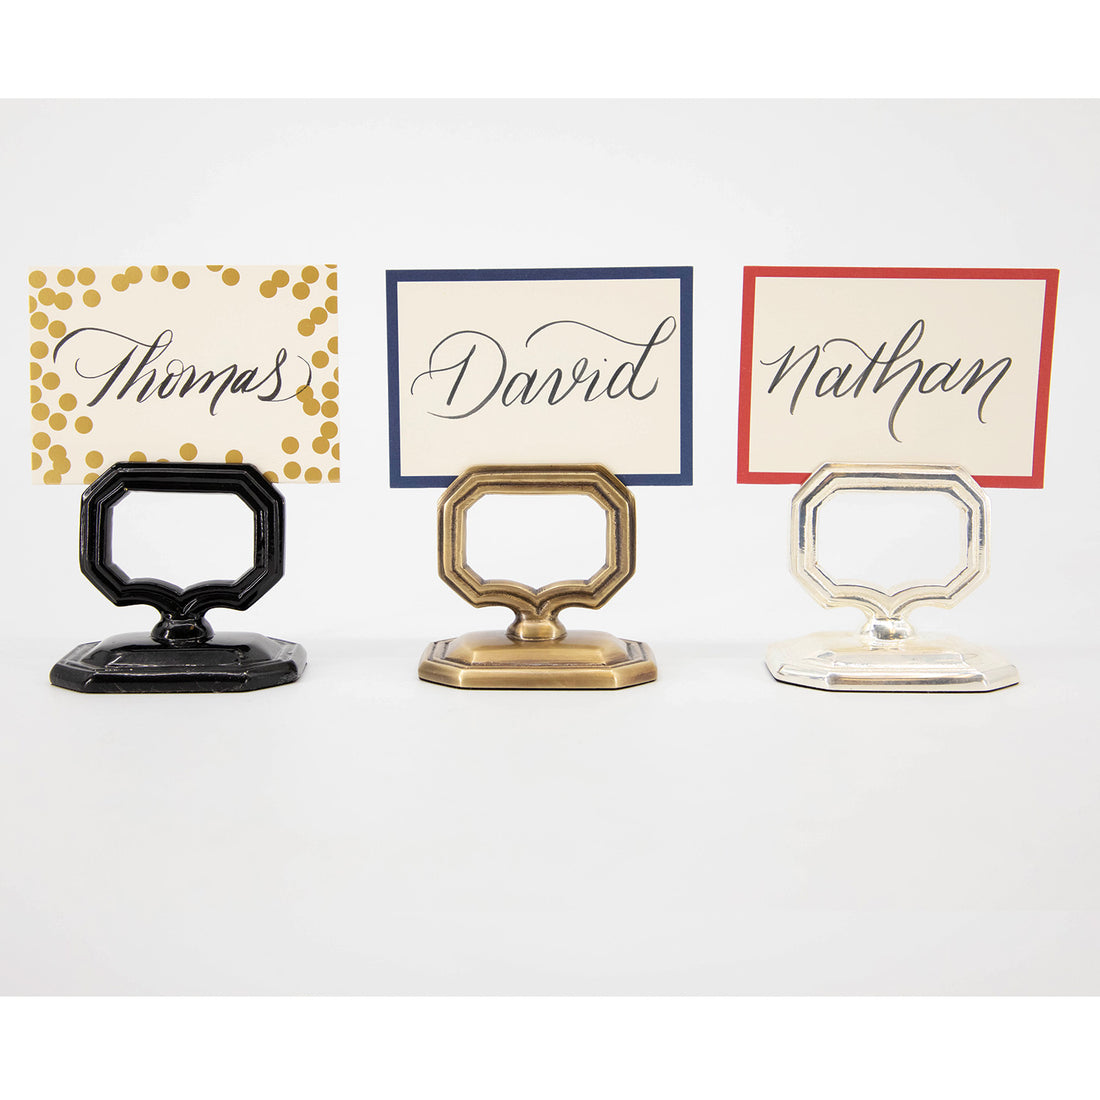 Three vintage-style Napkin Rings with Place Card Holders (Black, Brass and Silver) in a row, all three with different place cards.